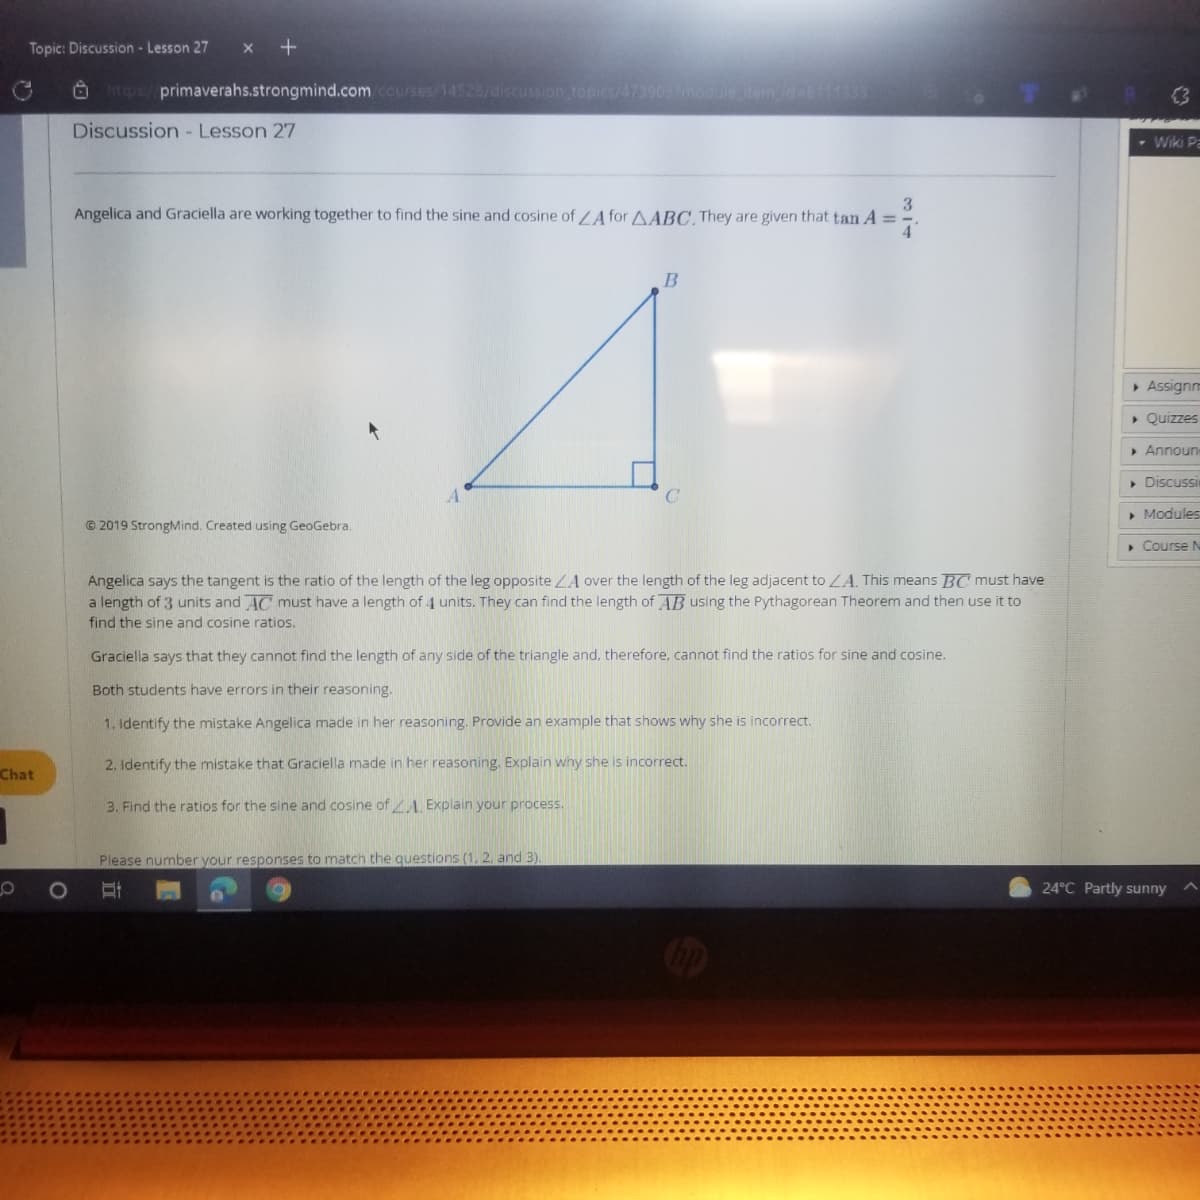 Topic: Discussion - Lesson 27
x +
O hrtps:/primaverahs.strongmind.com courses/14528/discussion topics/4739097modueamd-6111333
(3
Discussion - Lesson 27
- Wiki Pa
3
Angelica and Graciella are working together to find the sine and cosine of /A for AABC, They are given that tan A =
> Assignm
> Quizzes
> Announ
• Discussi
C.
• Modules
© 2019 StrongMind. Created using GeoGebra.
• Course N
Angelica says the tangent is the ratio of the length of the leg opposite LA over the length of the leg adjacent to LA. This means BC must have
a length of 3 units and AC must have a length of 4 units. They can find the length of AB using the Pythagorean Theorem and then use it to
find the sine and cosine ratios.
Graciella says that they cannot find the length of any side of the triangle and, therefore, cannot find the ratios for sine and cosine.
Both students have errors in their reasoning.
1. Identify the mistake Angelica made in her reasoning. Provide an example that shows why she is incorrect.
2. Identify the mistake that Graciella made in her reasoning. Explain why she is incorrect.
Chat
3. Find the ratios for the sine and cosine of ZA, Explain your process.
Please number your responses to match the questions (1, 2. and 3).
24°C Partly sunny
